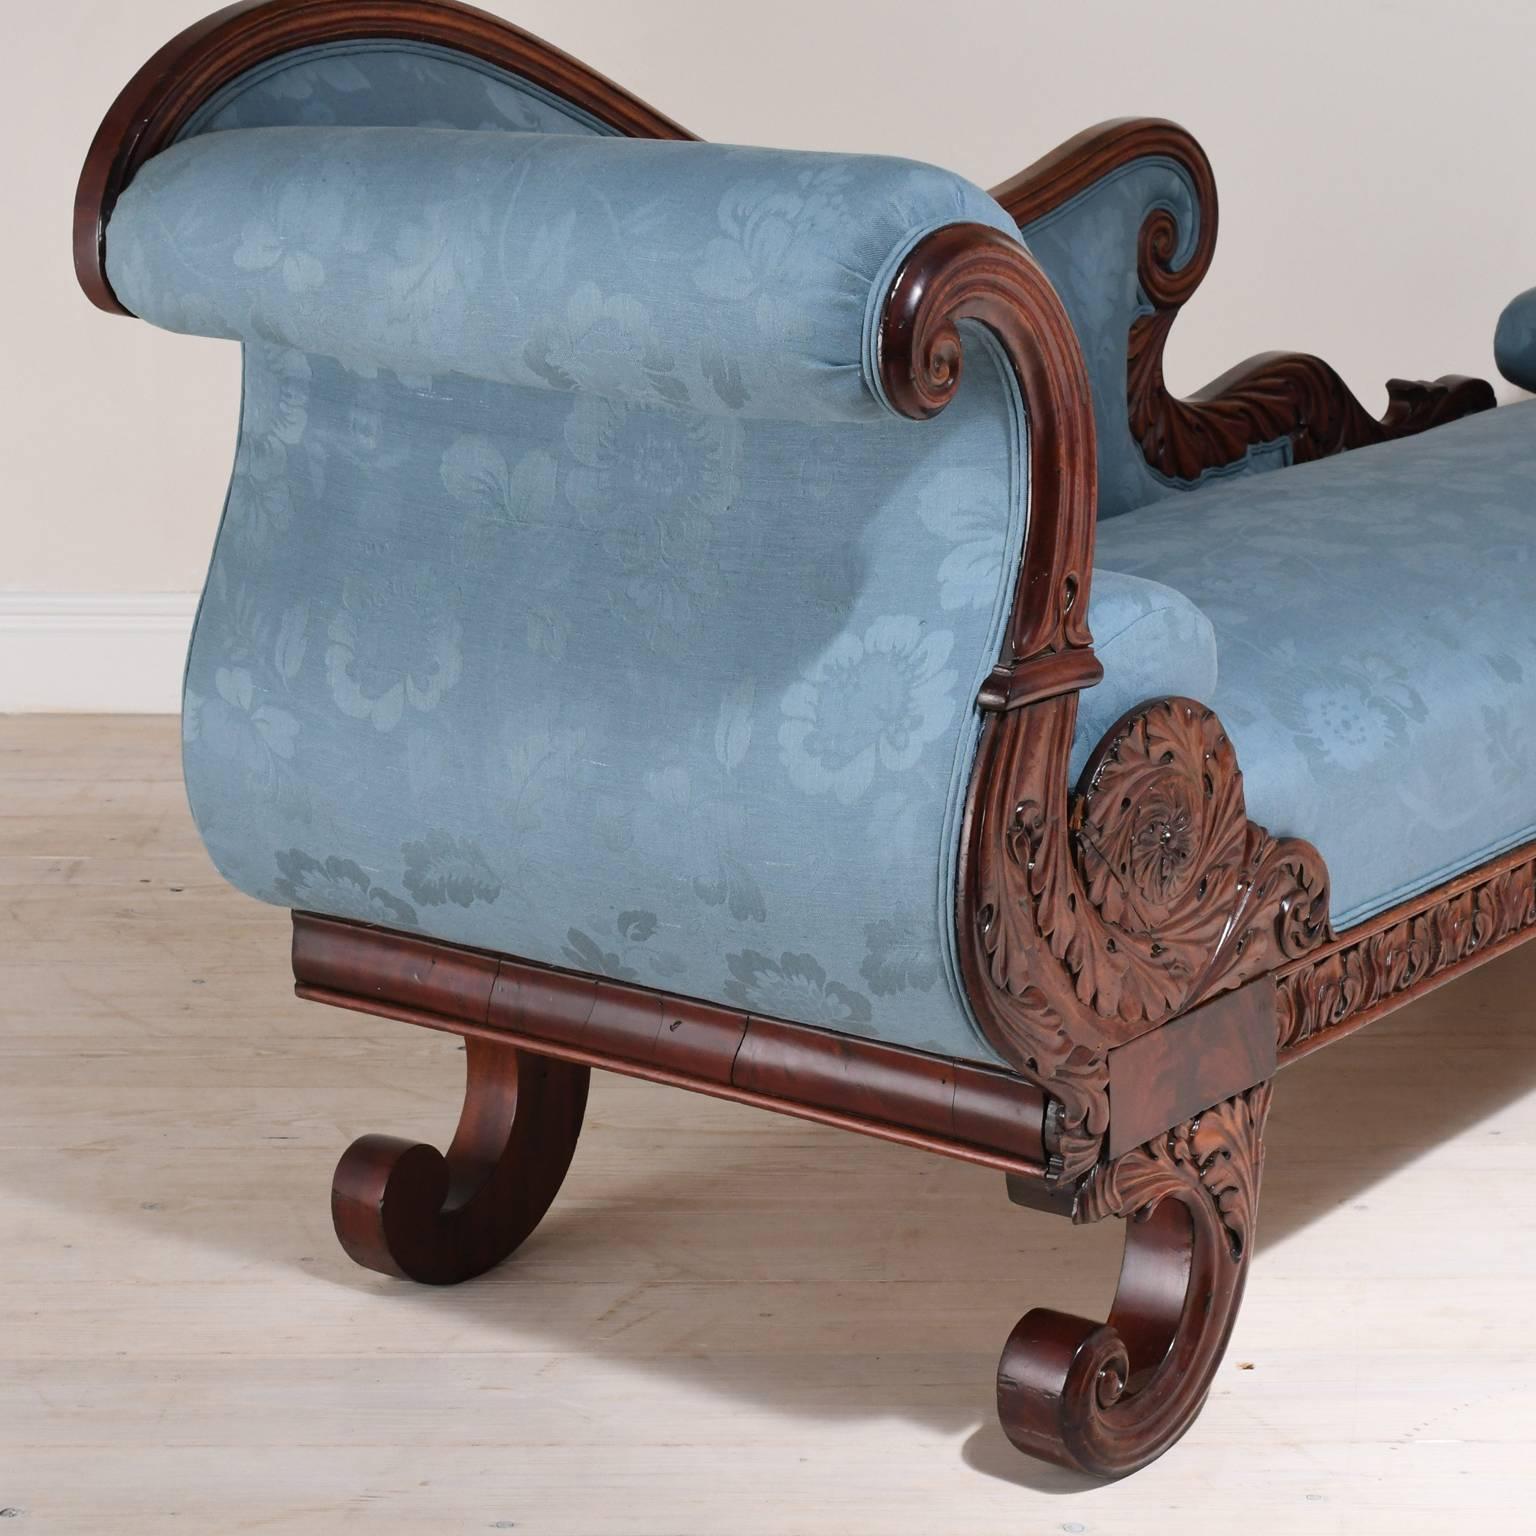 Scandinavian 19th Century Empire Recamier or Fainting Couch in Mahogany with Upholstery